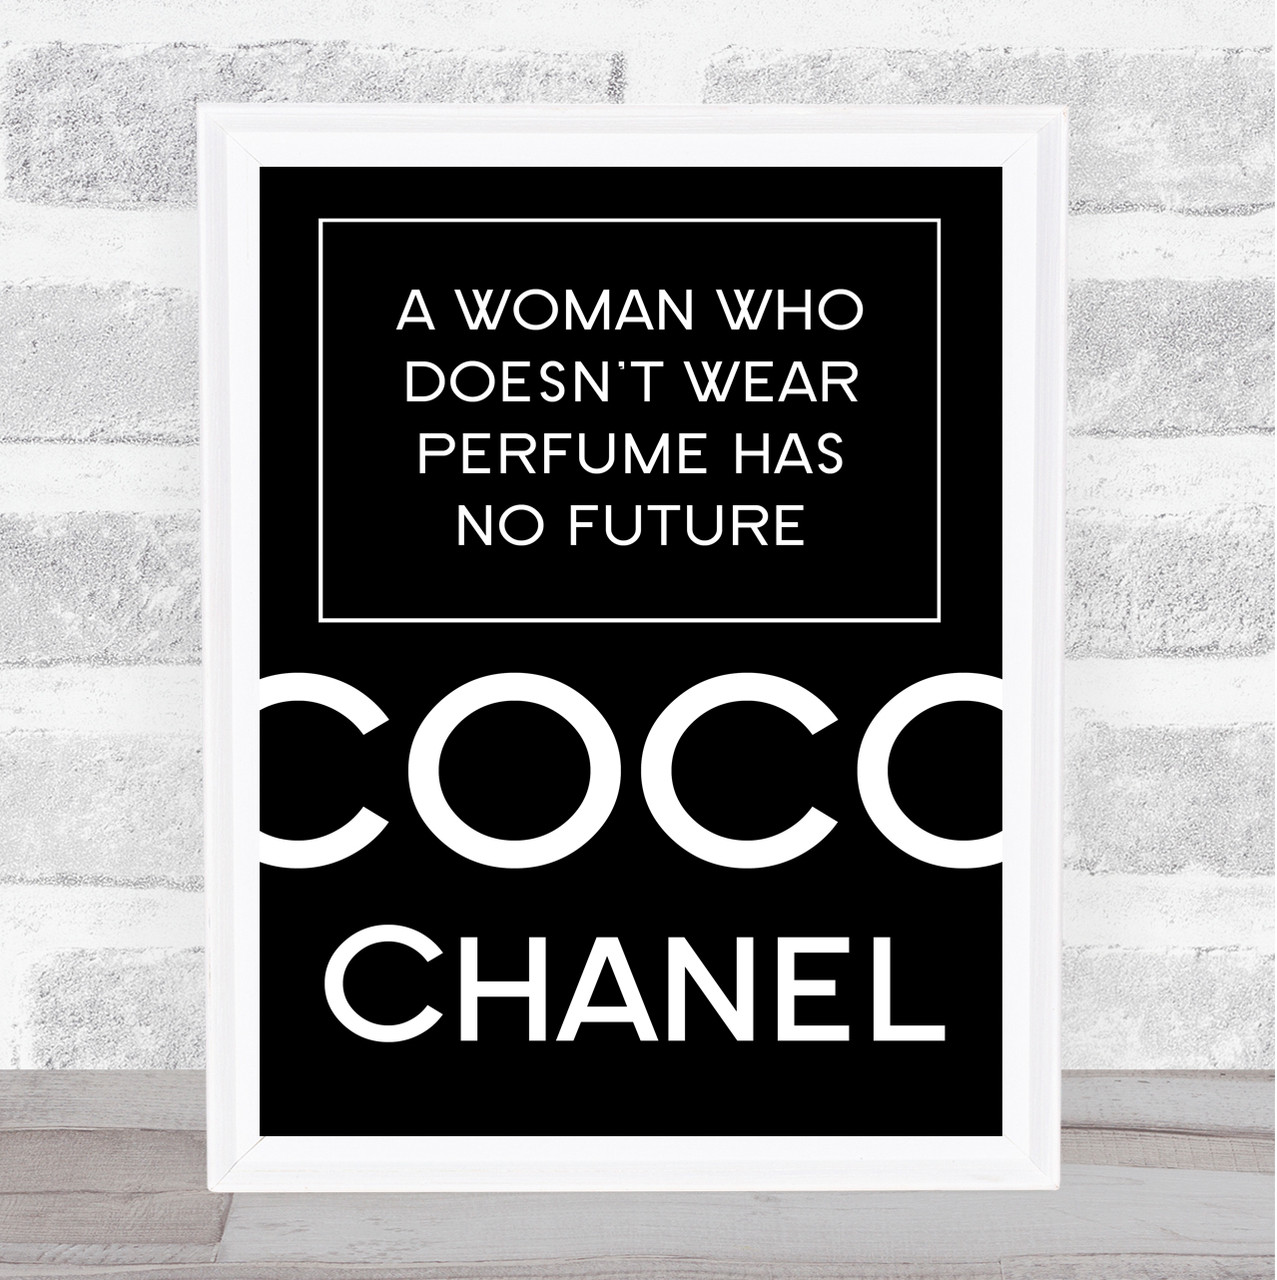 Coco Chanel Quotes on X: A woman who doesn't wear perfume has no future. - Coco  Chanel  / X